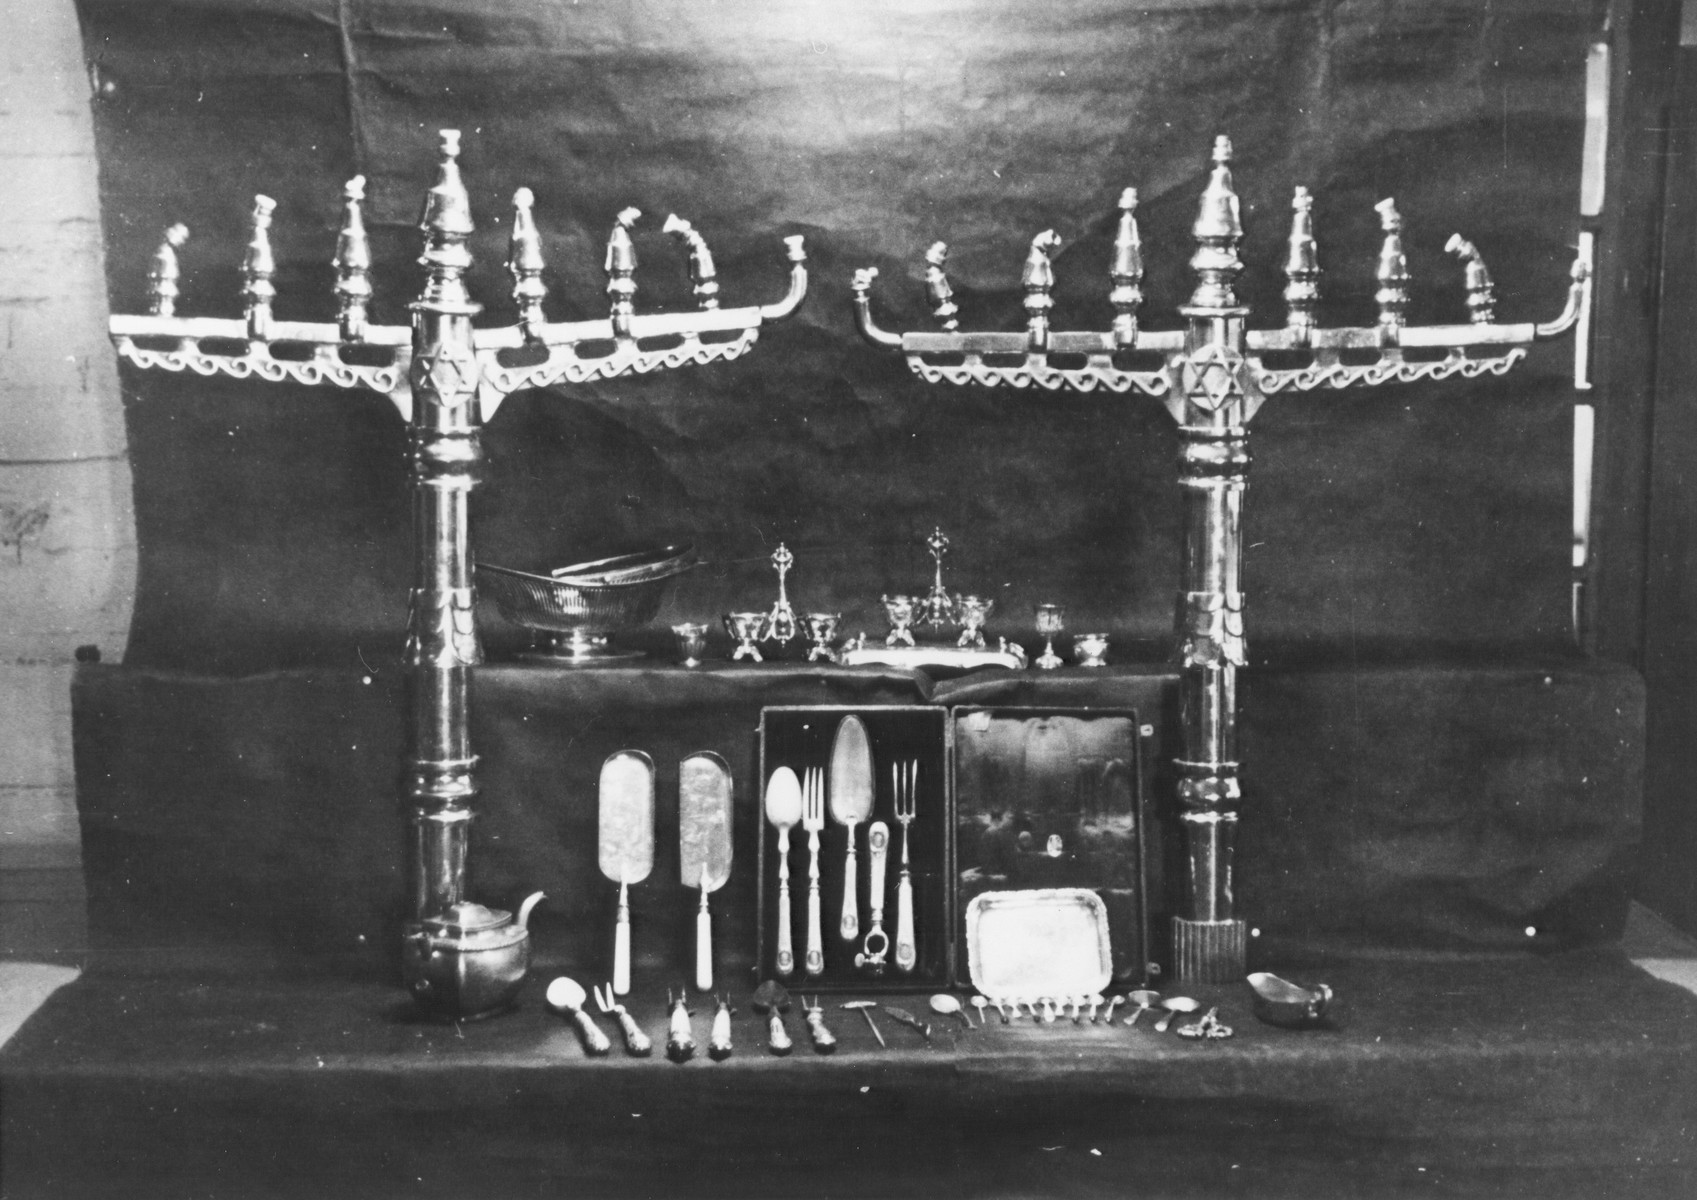 Display of confiscated menorahs and other ritual objects looted from European synagogues.